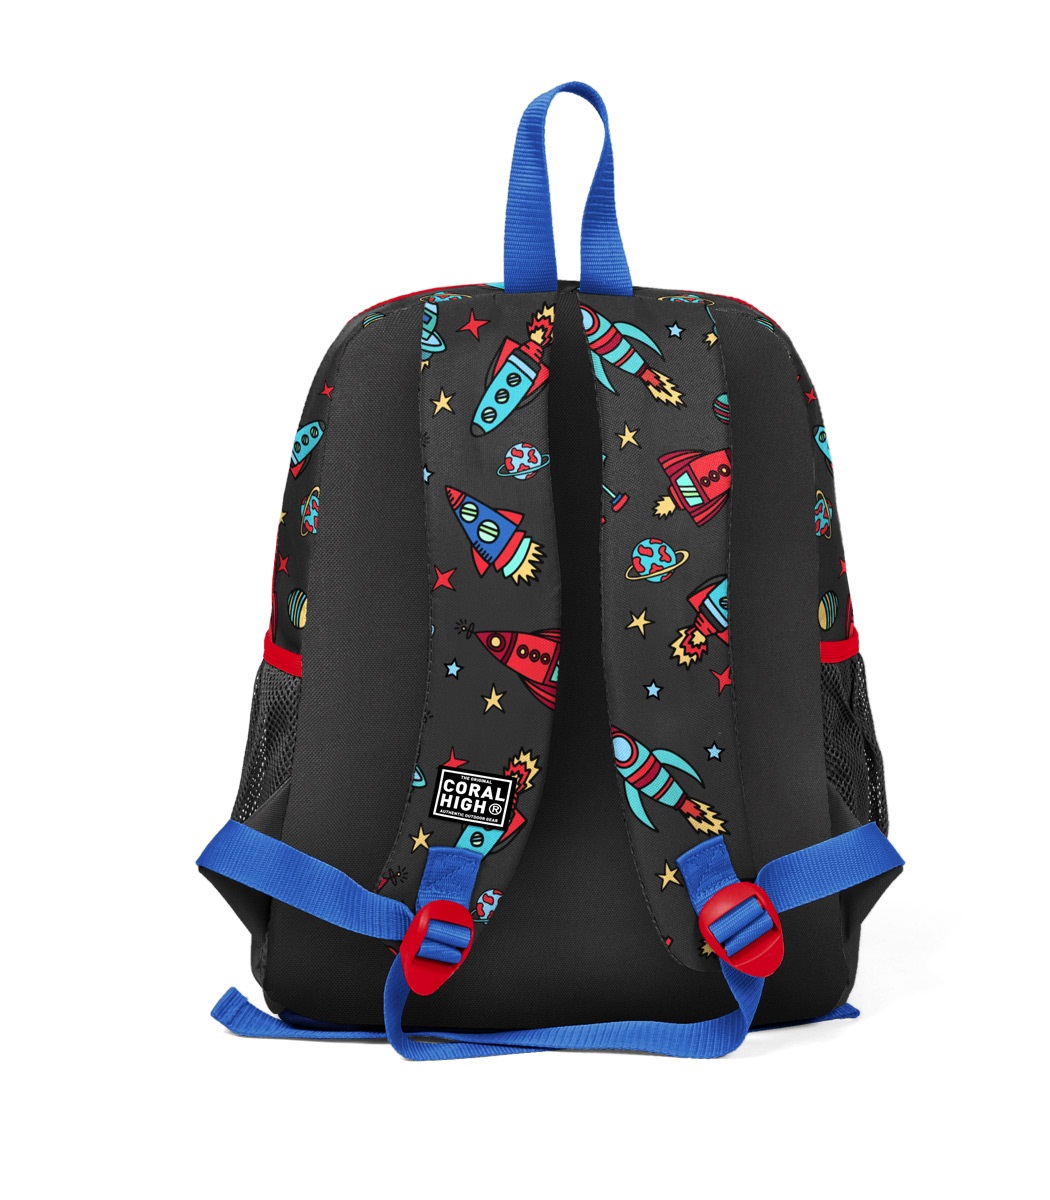 Coral High Kids Two Compartment Backpack - Dark Gray Red Space Pattern